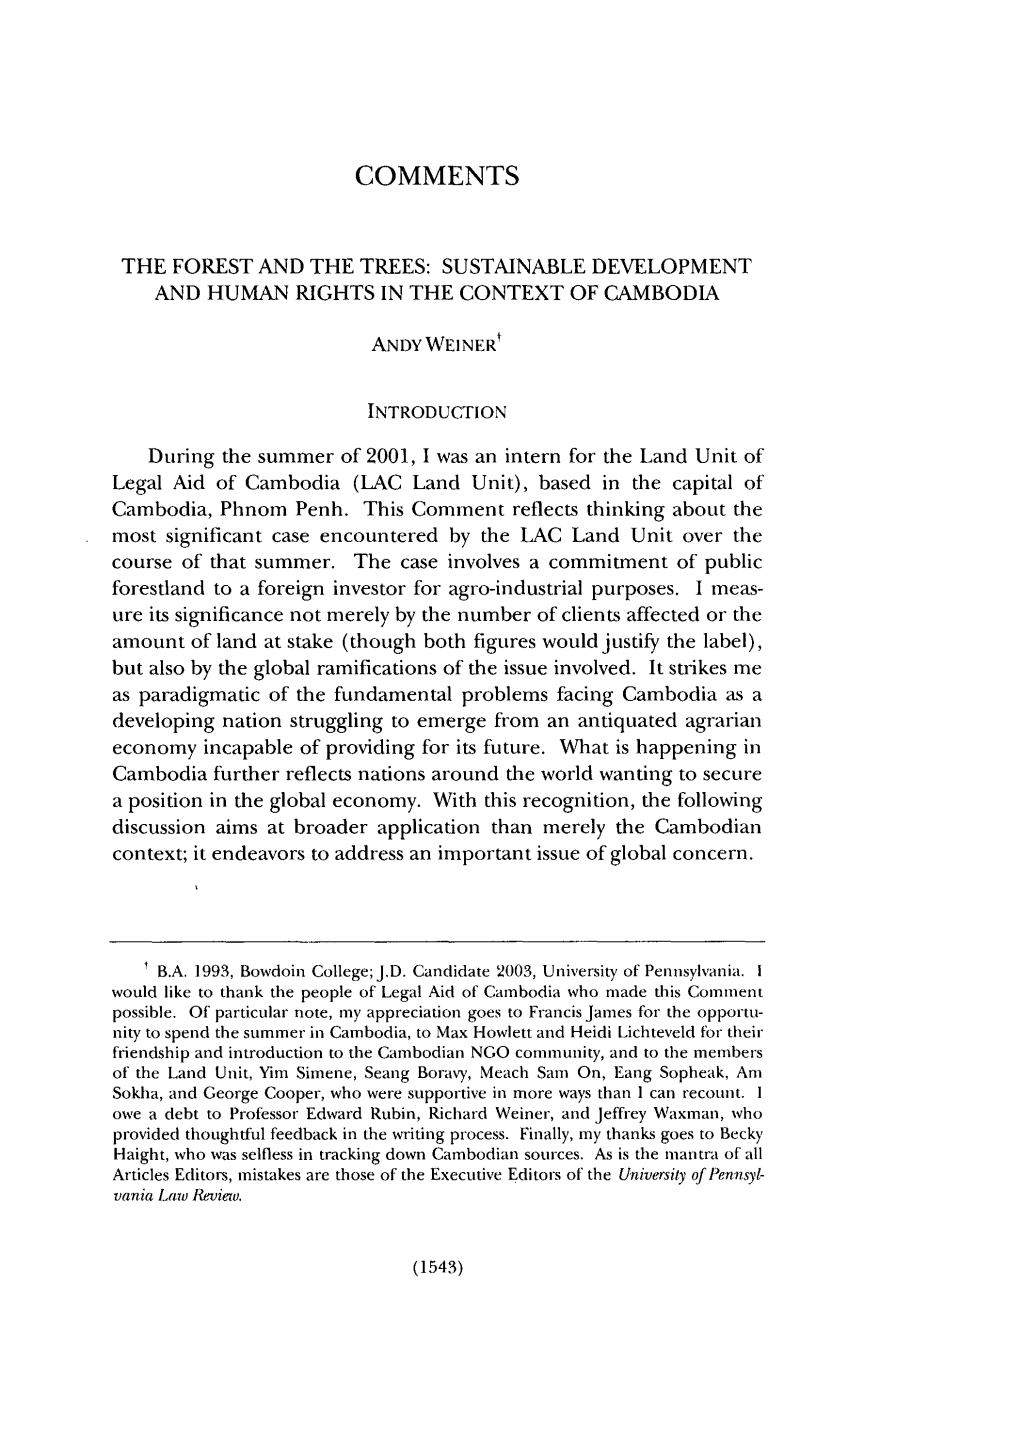 The Forest and the Trees: Sustainable Development and Human Rights in the Context of Cambodia